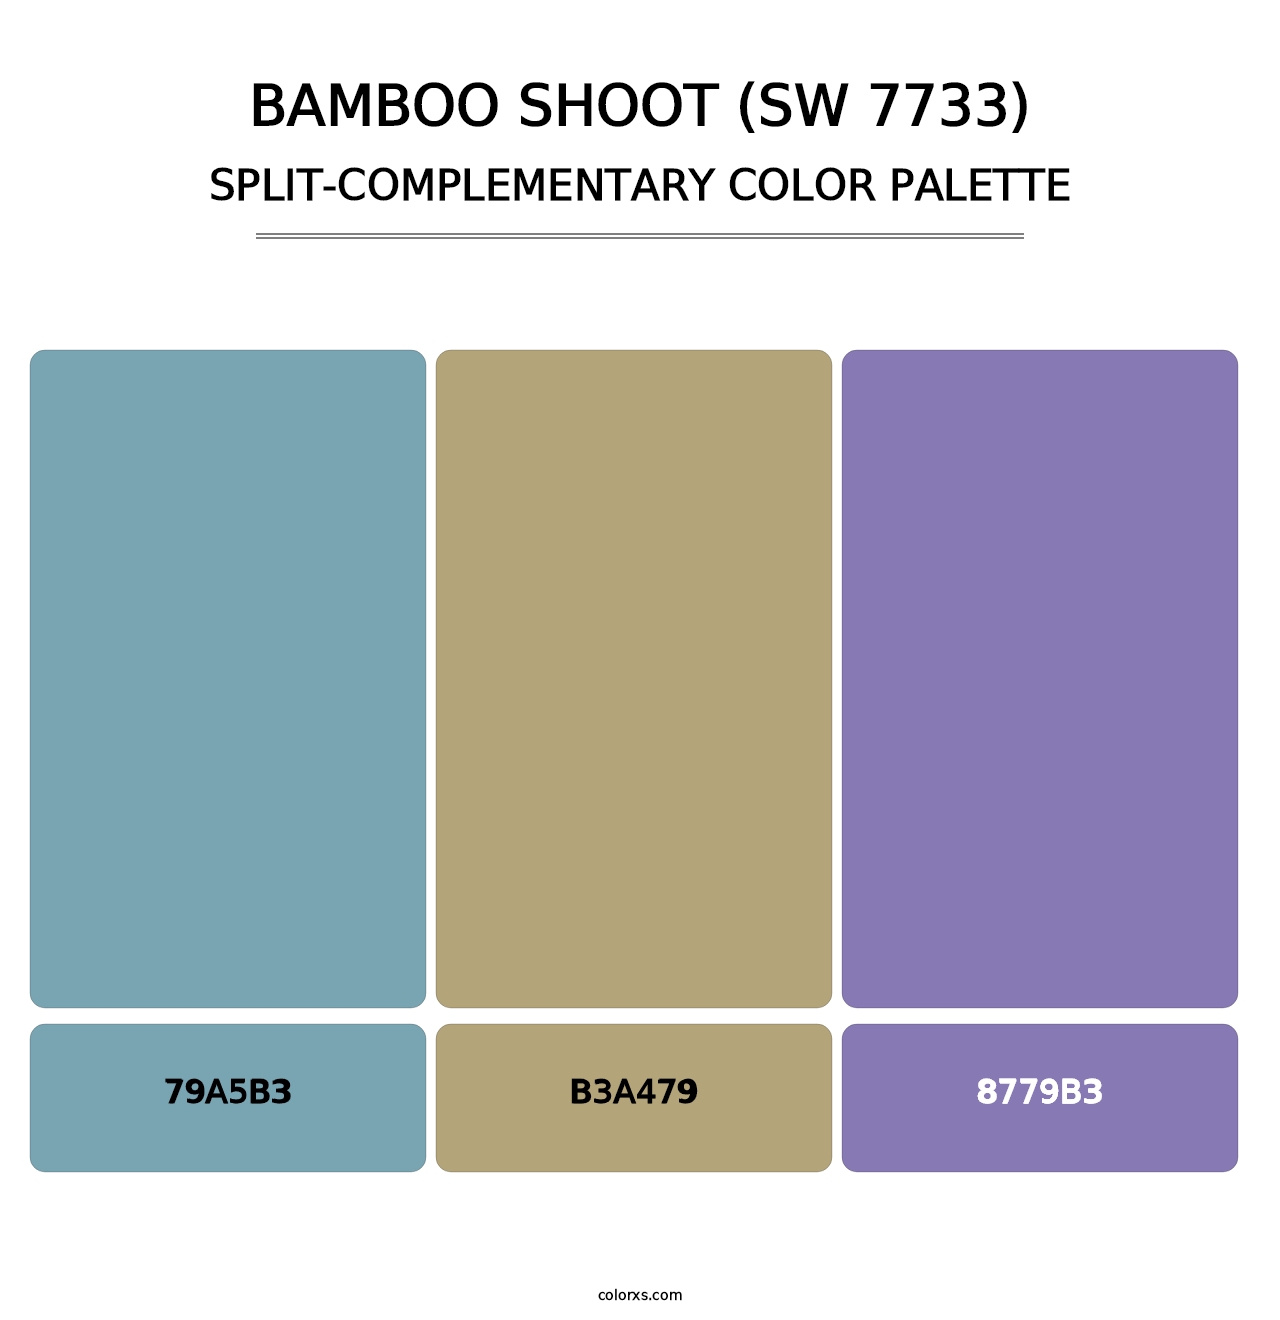 Bamboo Shoot (SW 7733) - Split-Complementary Color Palette